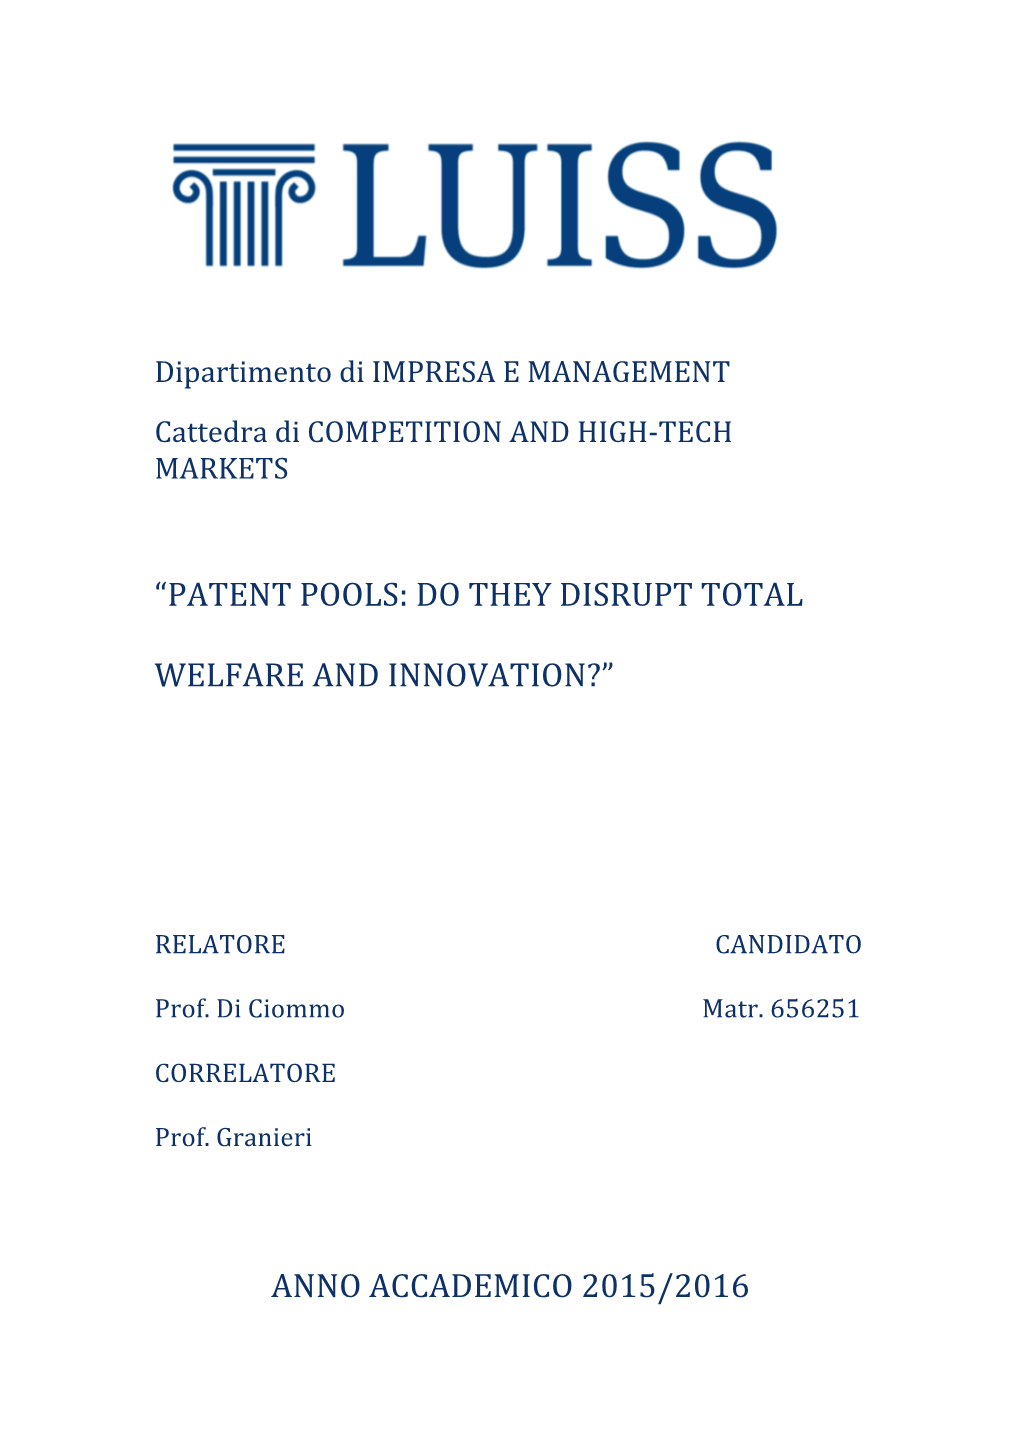 “Patent Pools: Do They Disrupt Total Welfare And